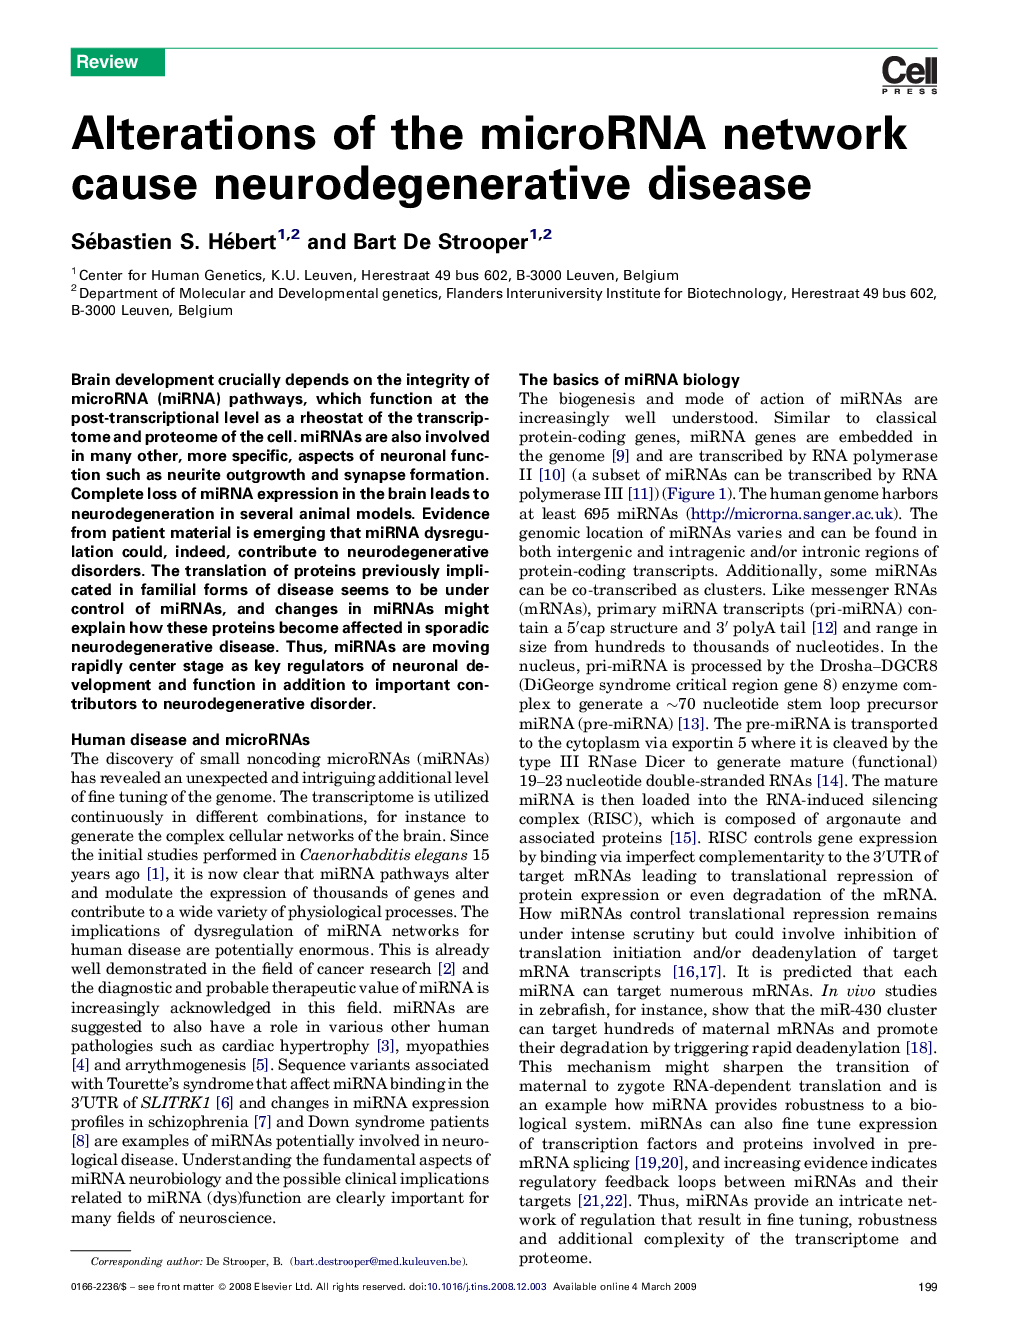 Alterations of the microRNA network cause neurodegenerative disease